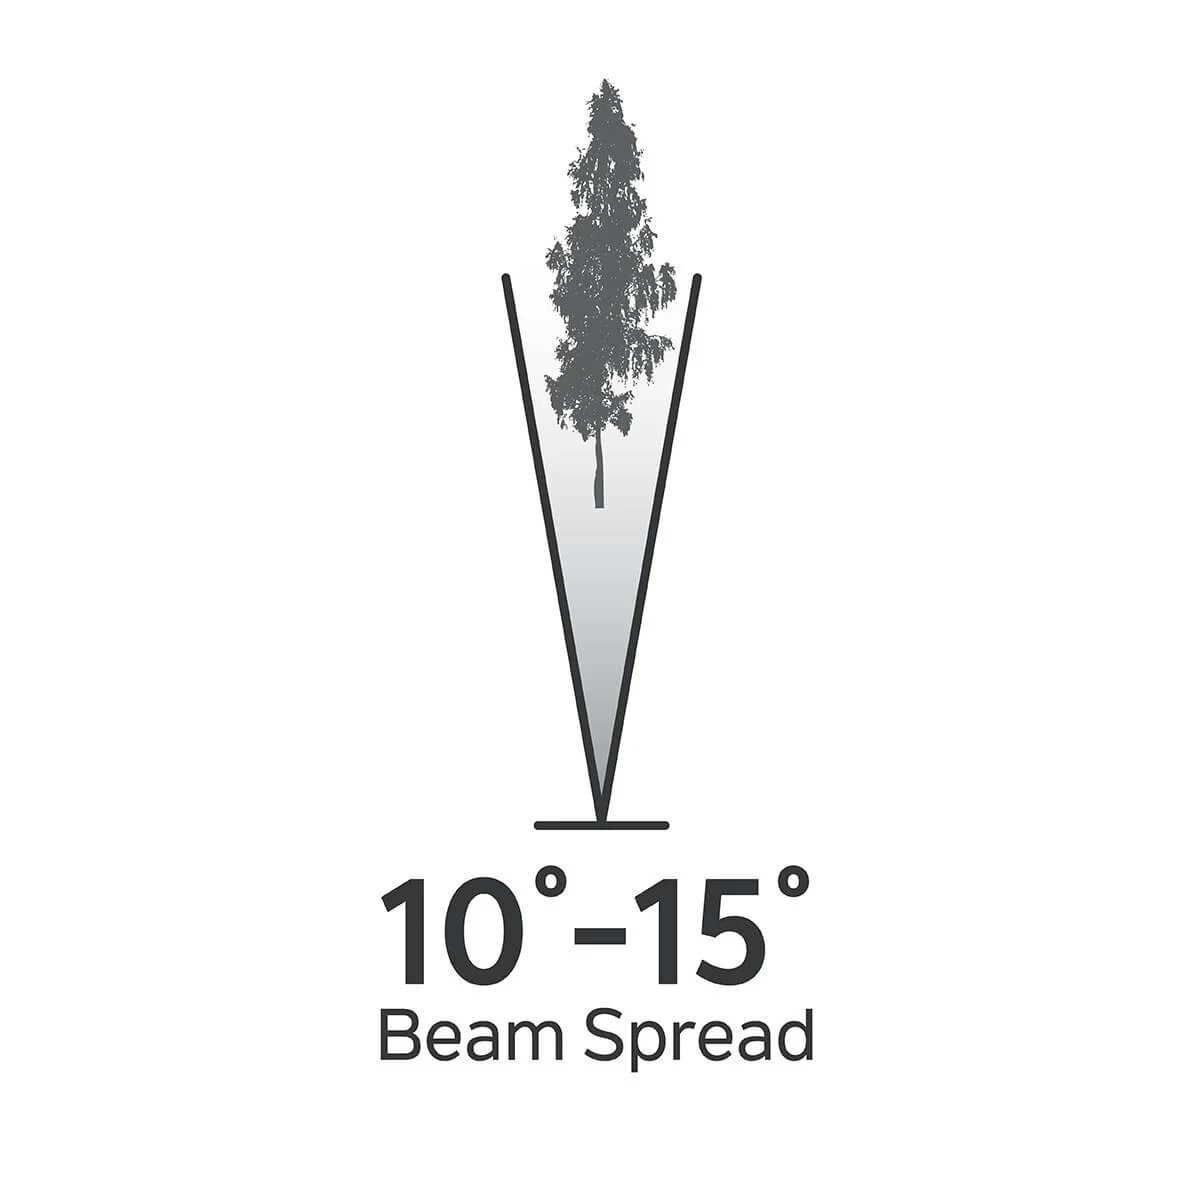 Illustration demonstrating a skinny tree with 10 to 15 degree beam spread